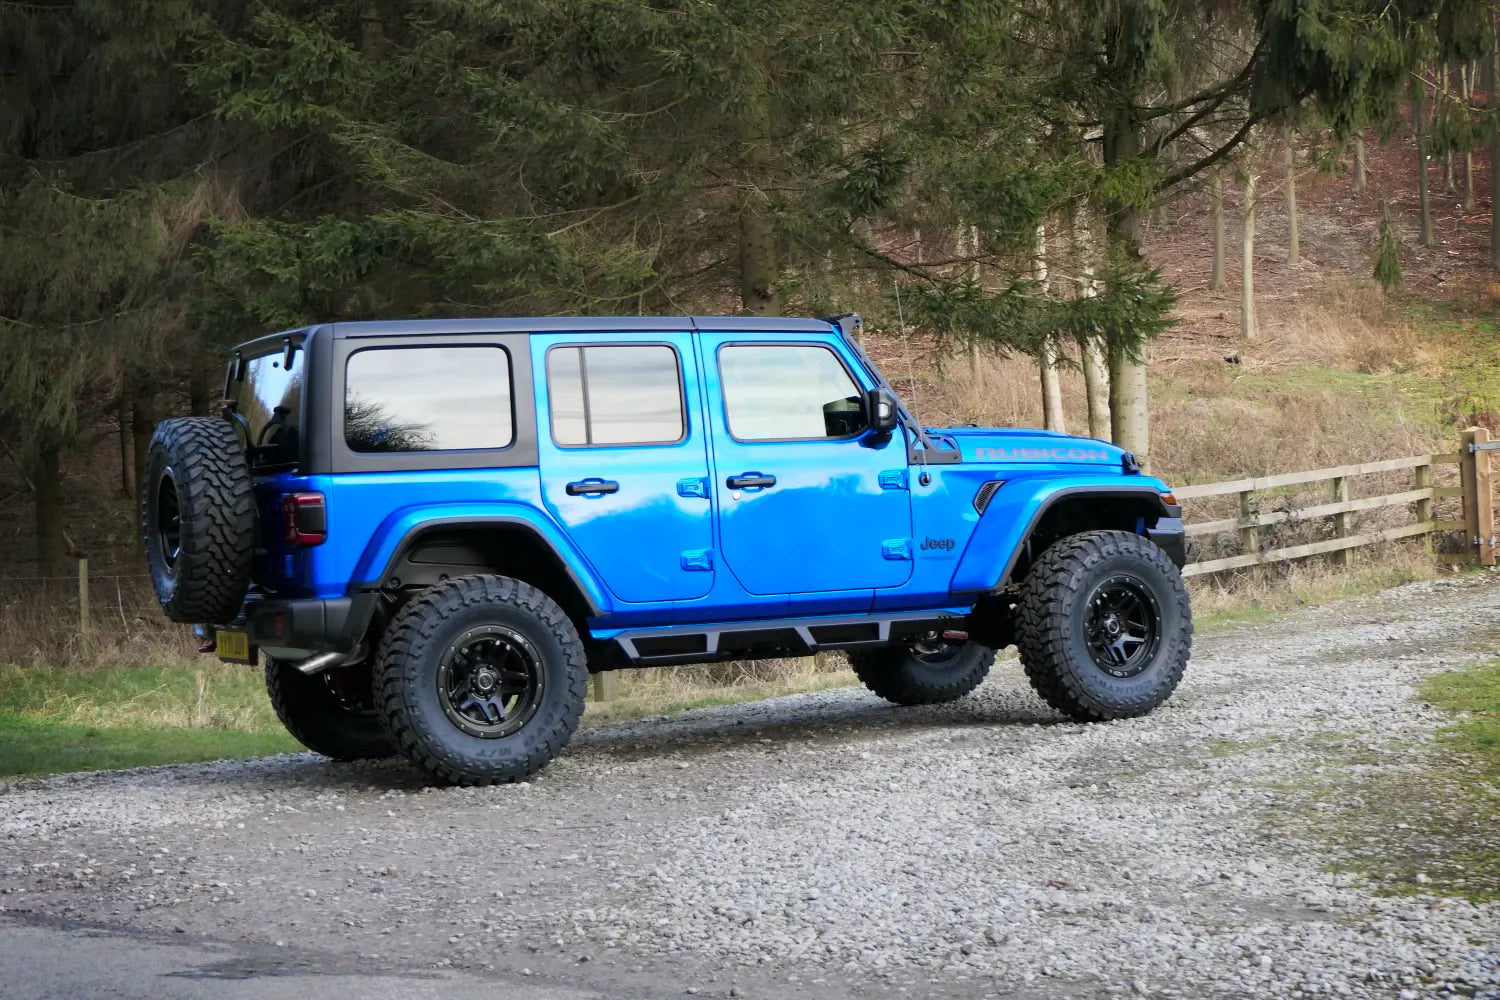 Top 10 Jeep Wrangler Colors--Hydro Blue